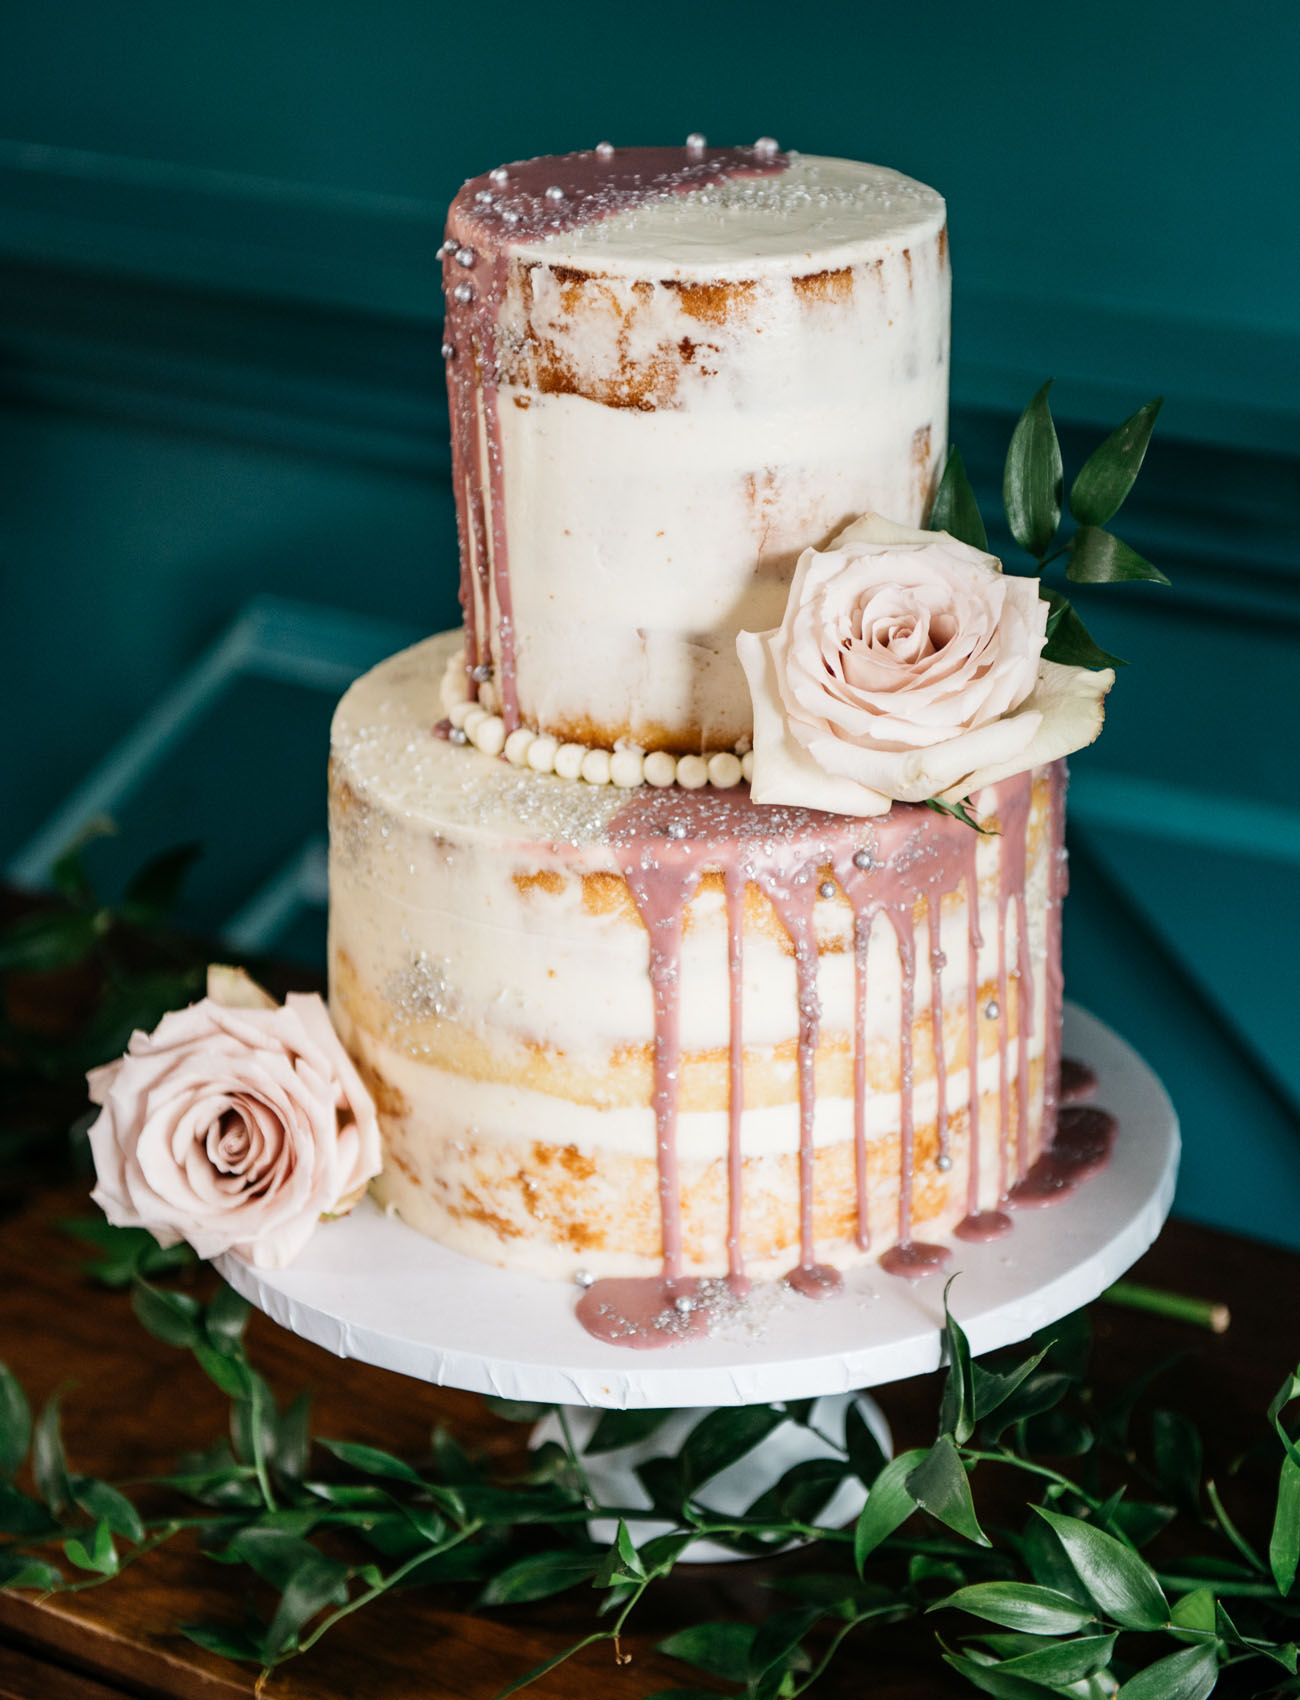 The first wedding cake with pink dripping, edible pearls and blush roses